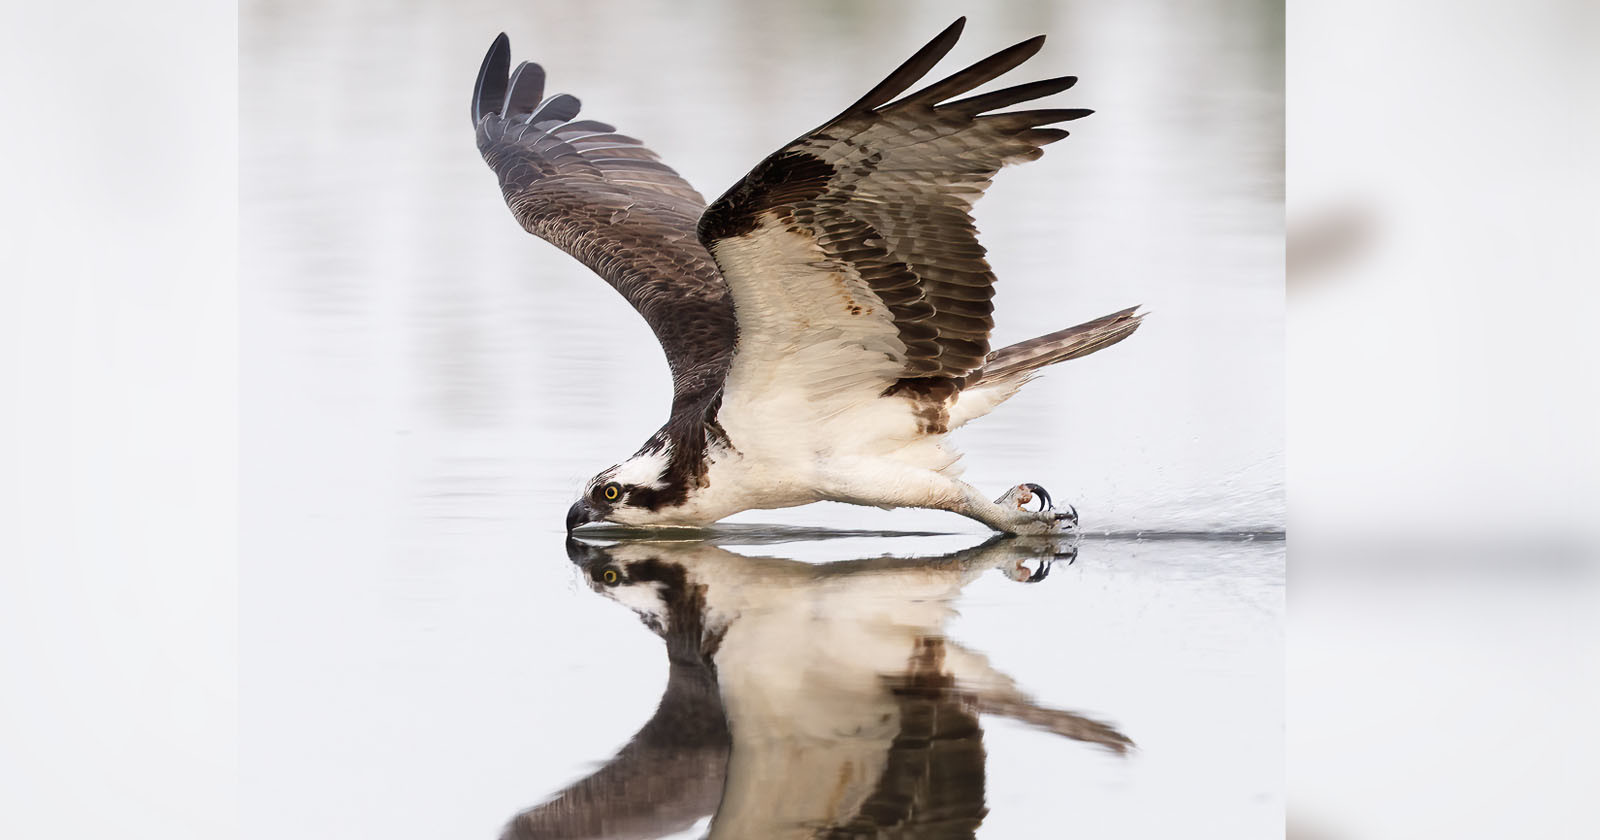 Spectacular and Unusual Photo of an Osprey Gliding on the Waters Surface